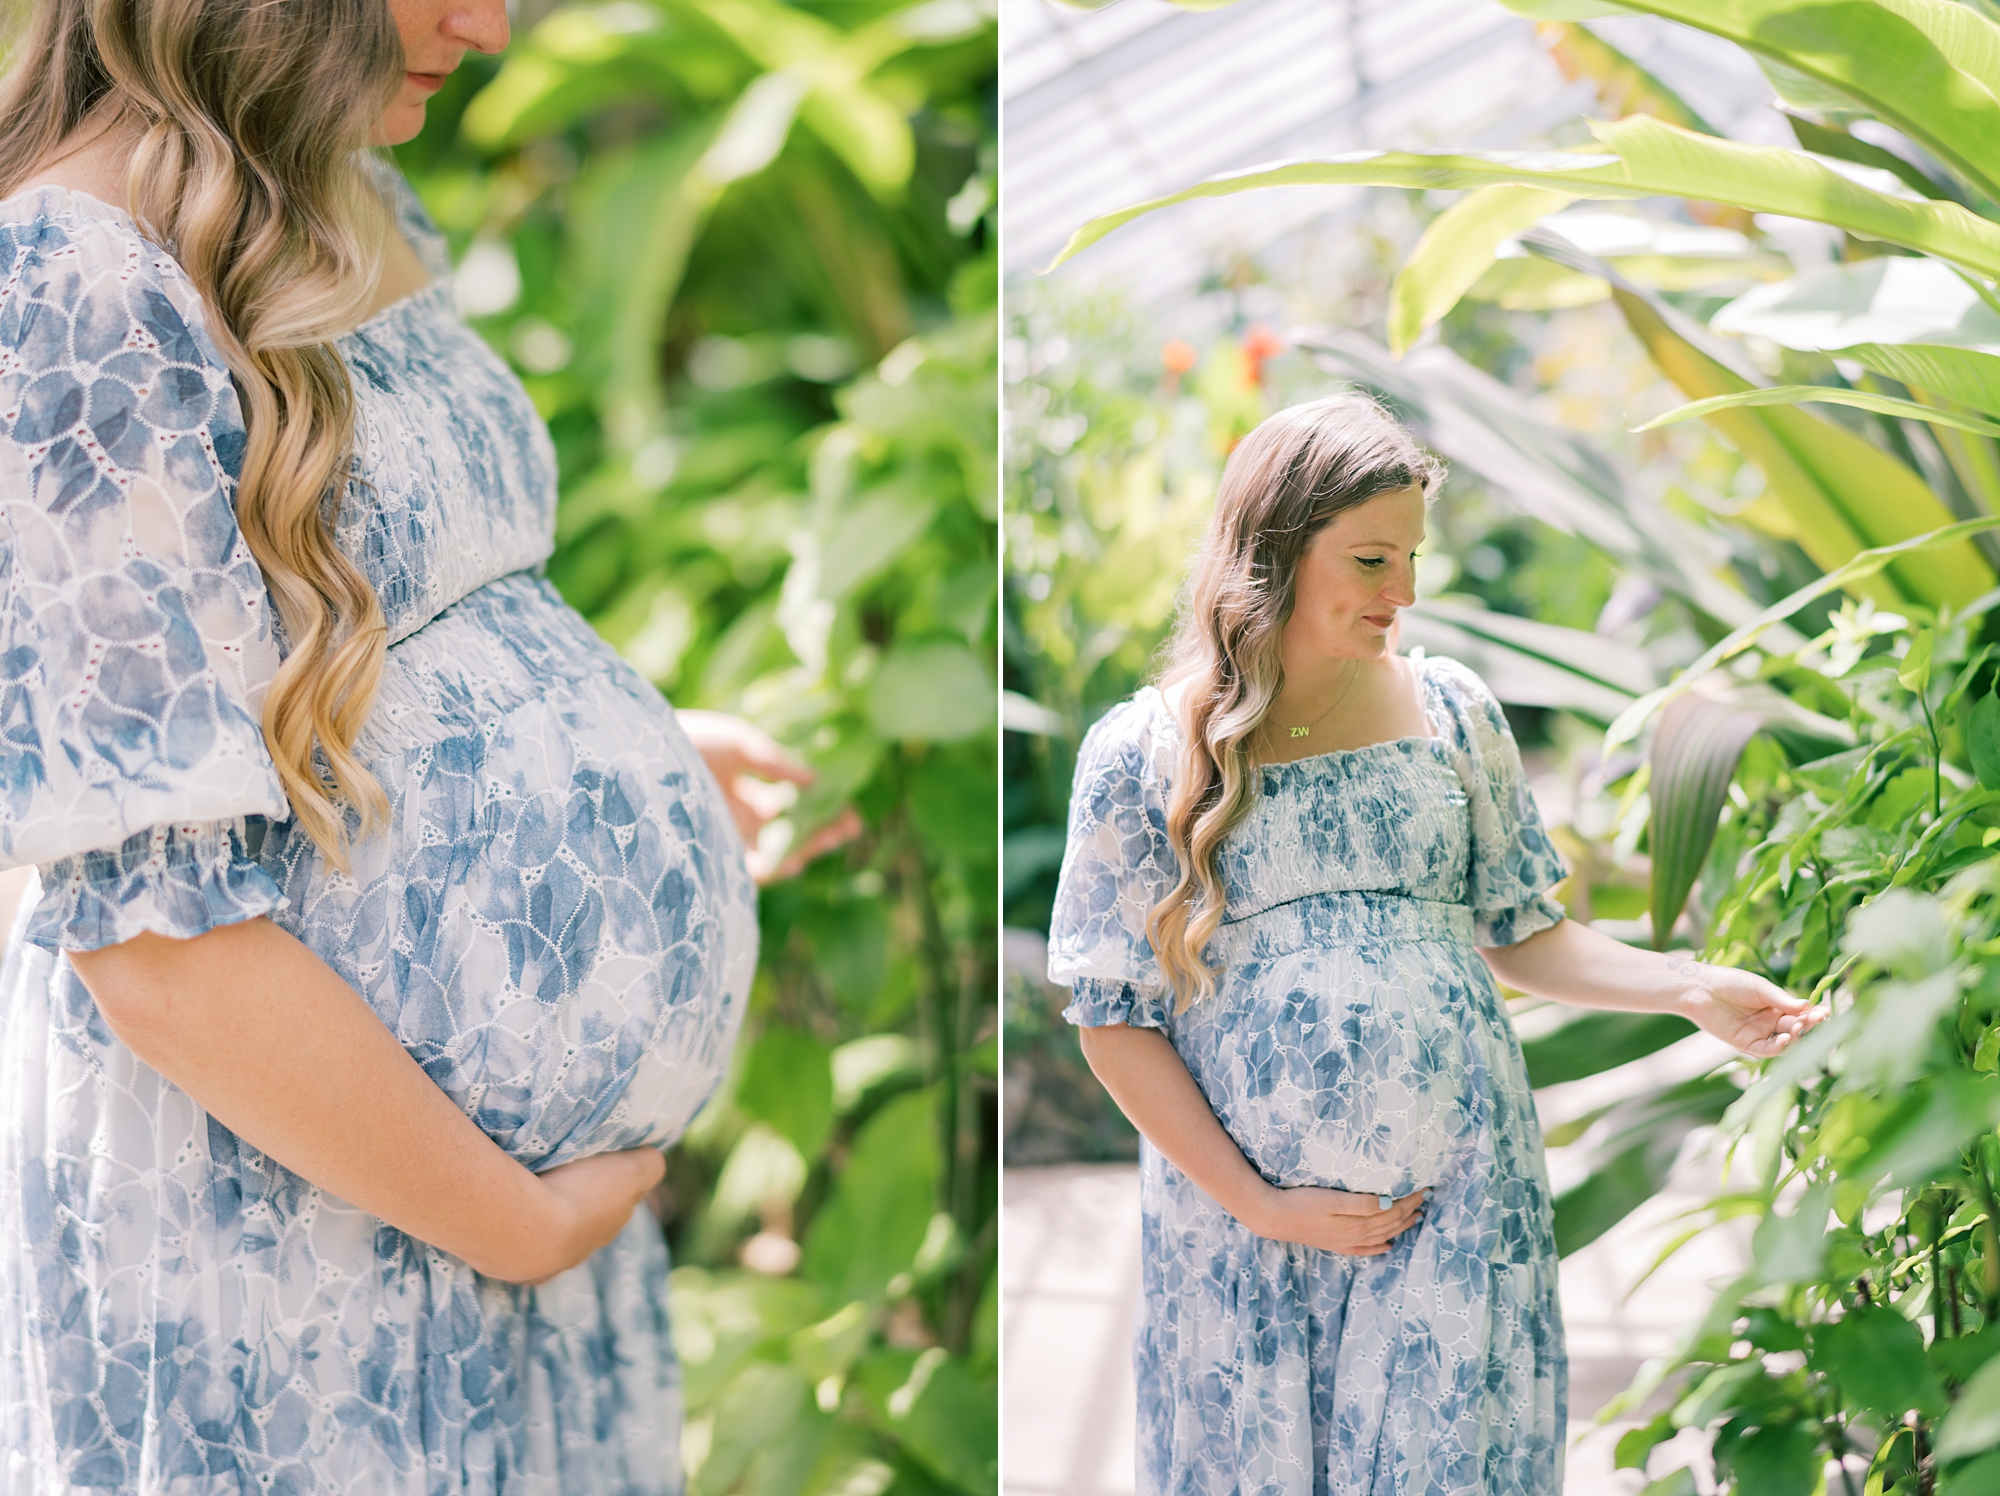 woman looks at plant inside Rawlings Conservatory while cradling baby bump in hands